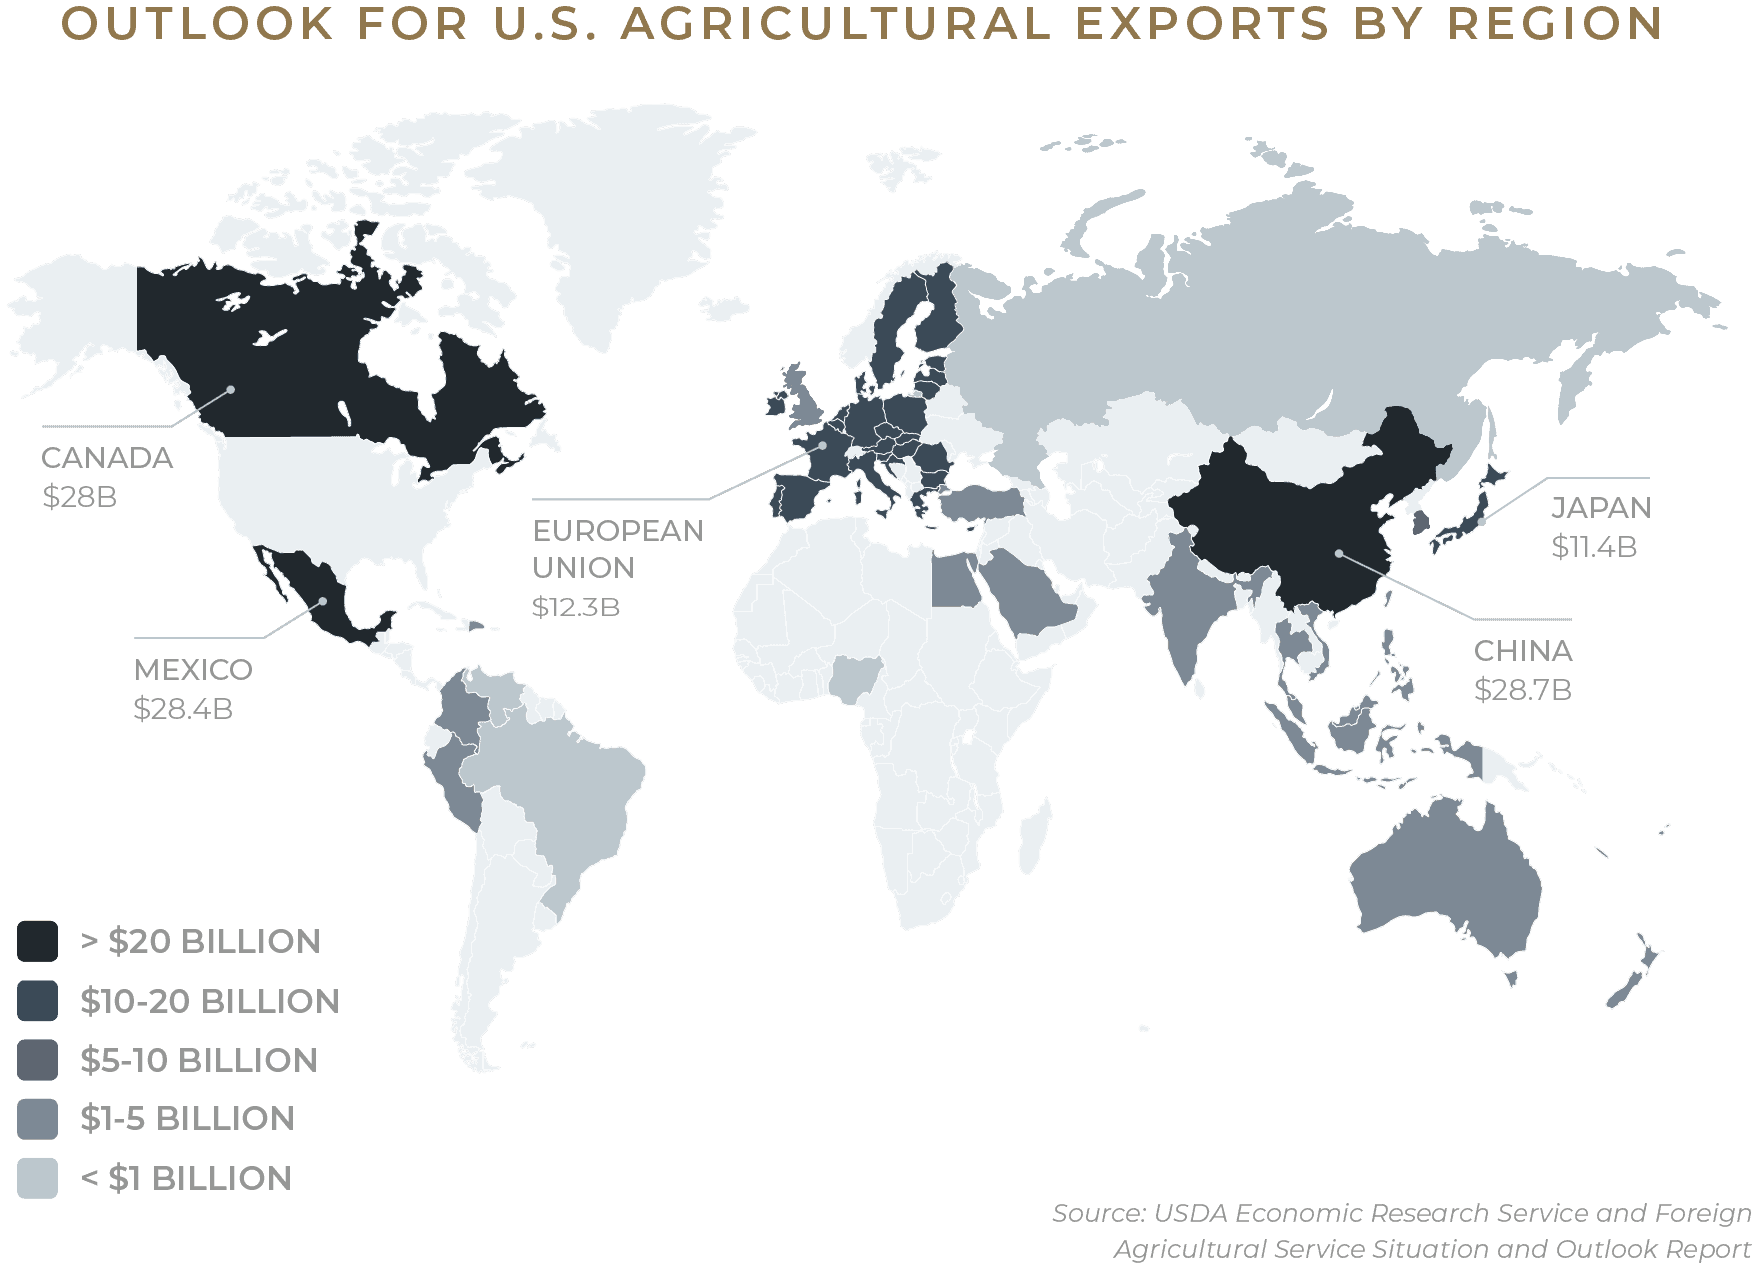 World map showing the forecast for U.S. agricultural exports by region with values ranging from less than $1 billion to over $20 billion in Agricultural Economics.